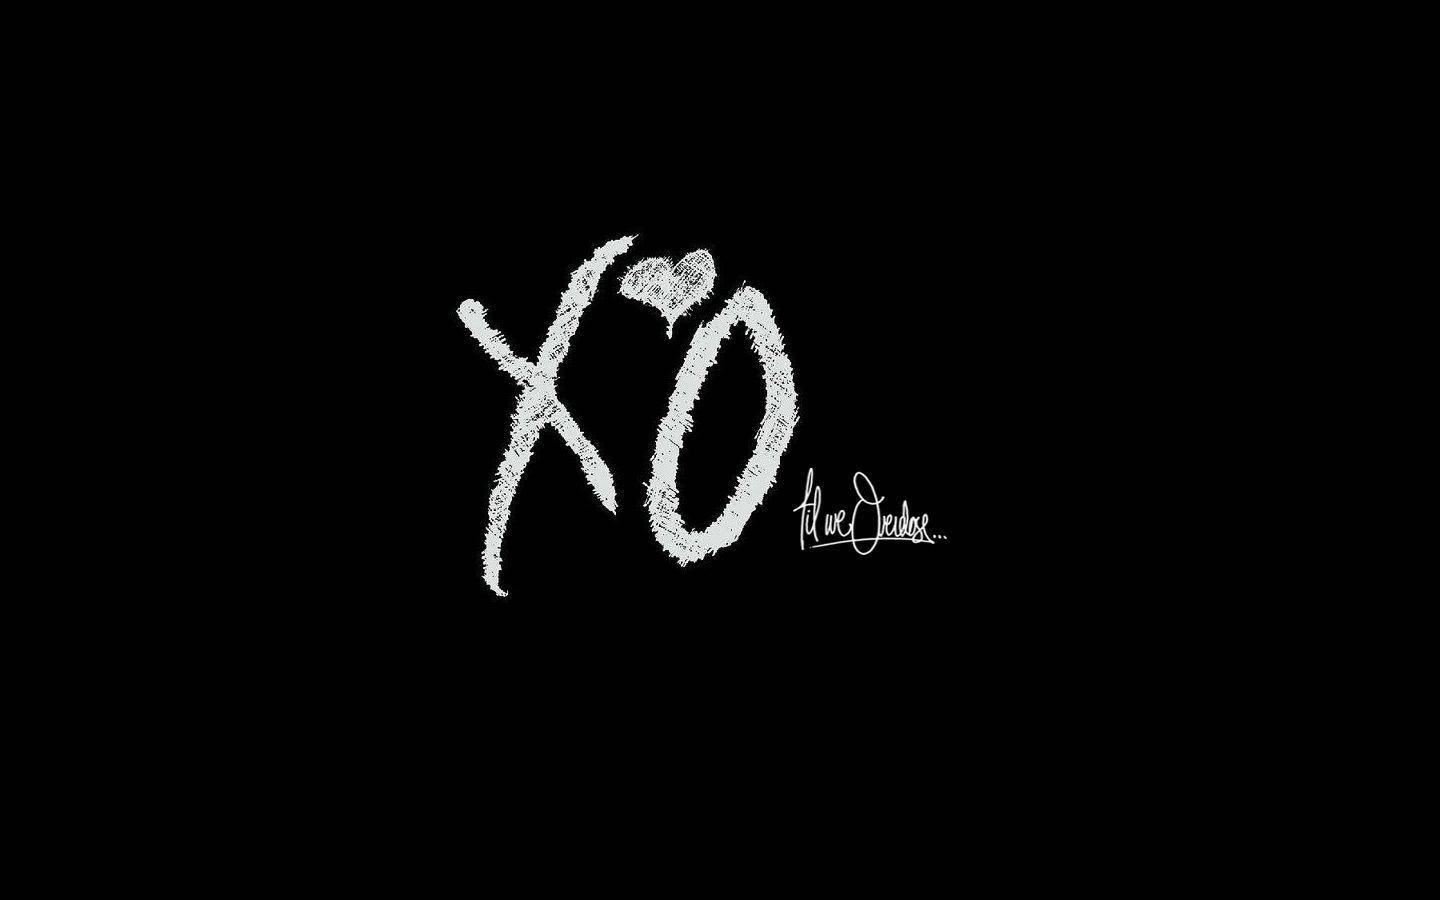 A Black Background With The Word Xo Written On It